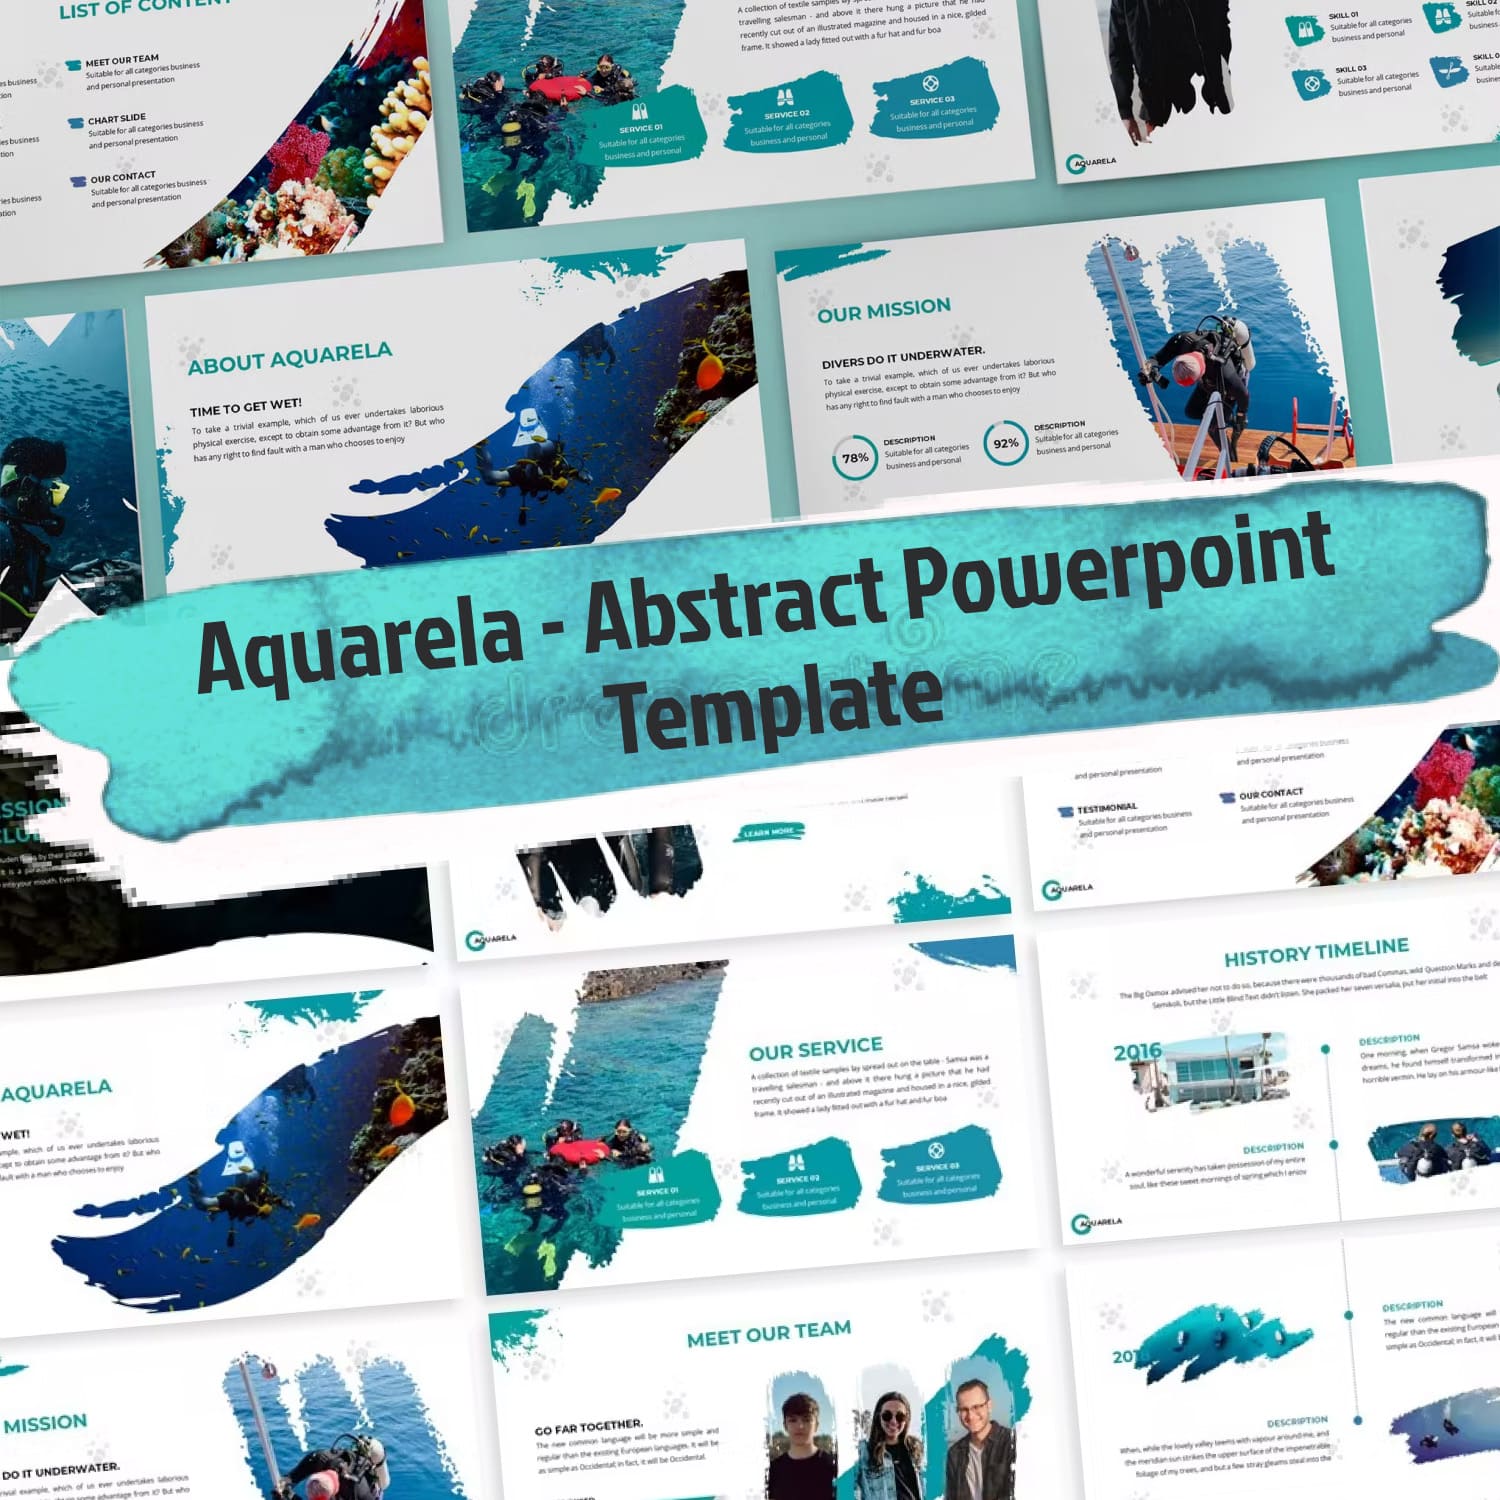 Aquarela abstract powerpoint template - main image preview.